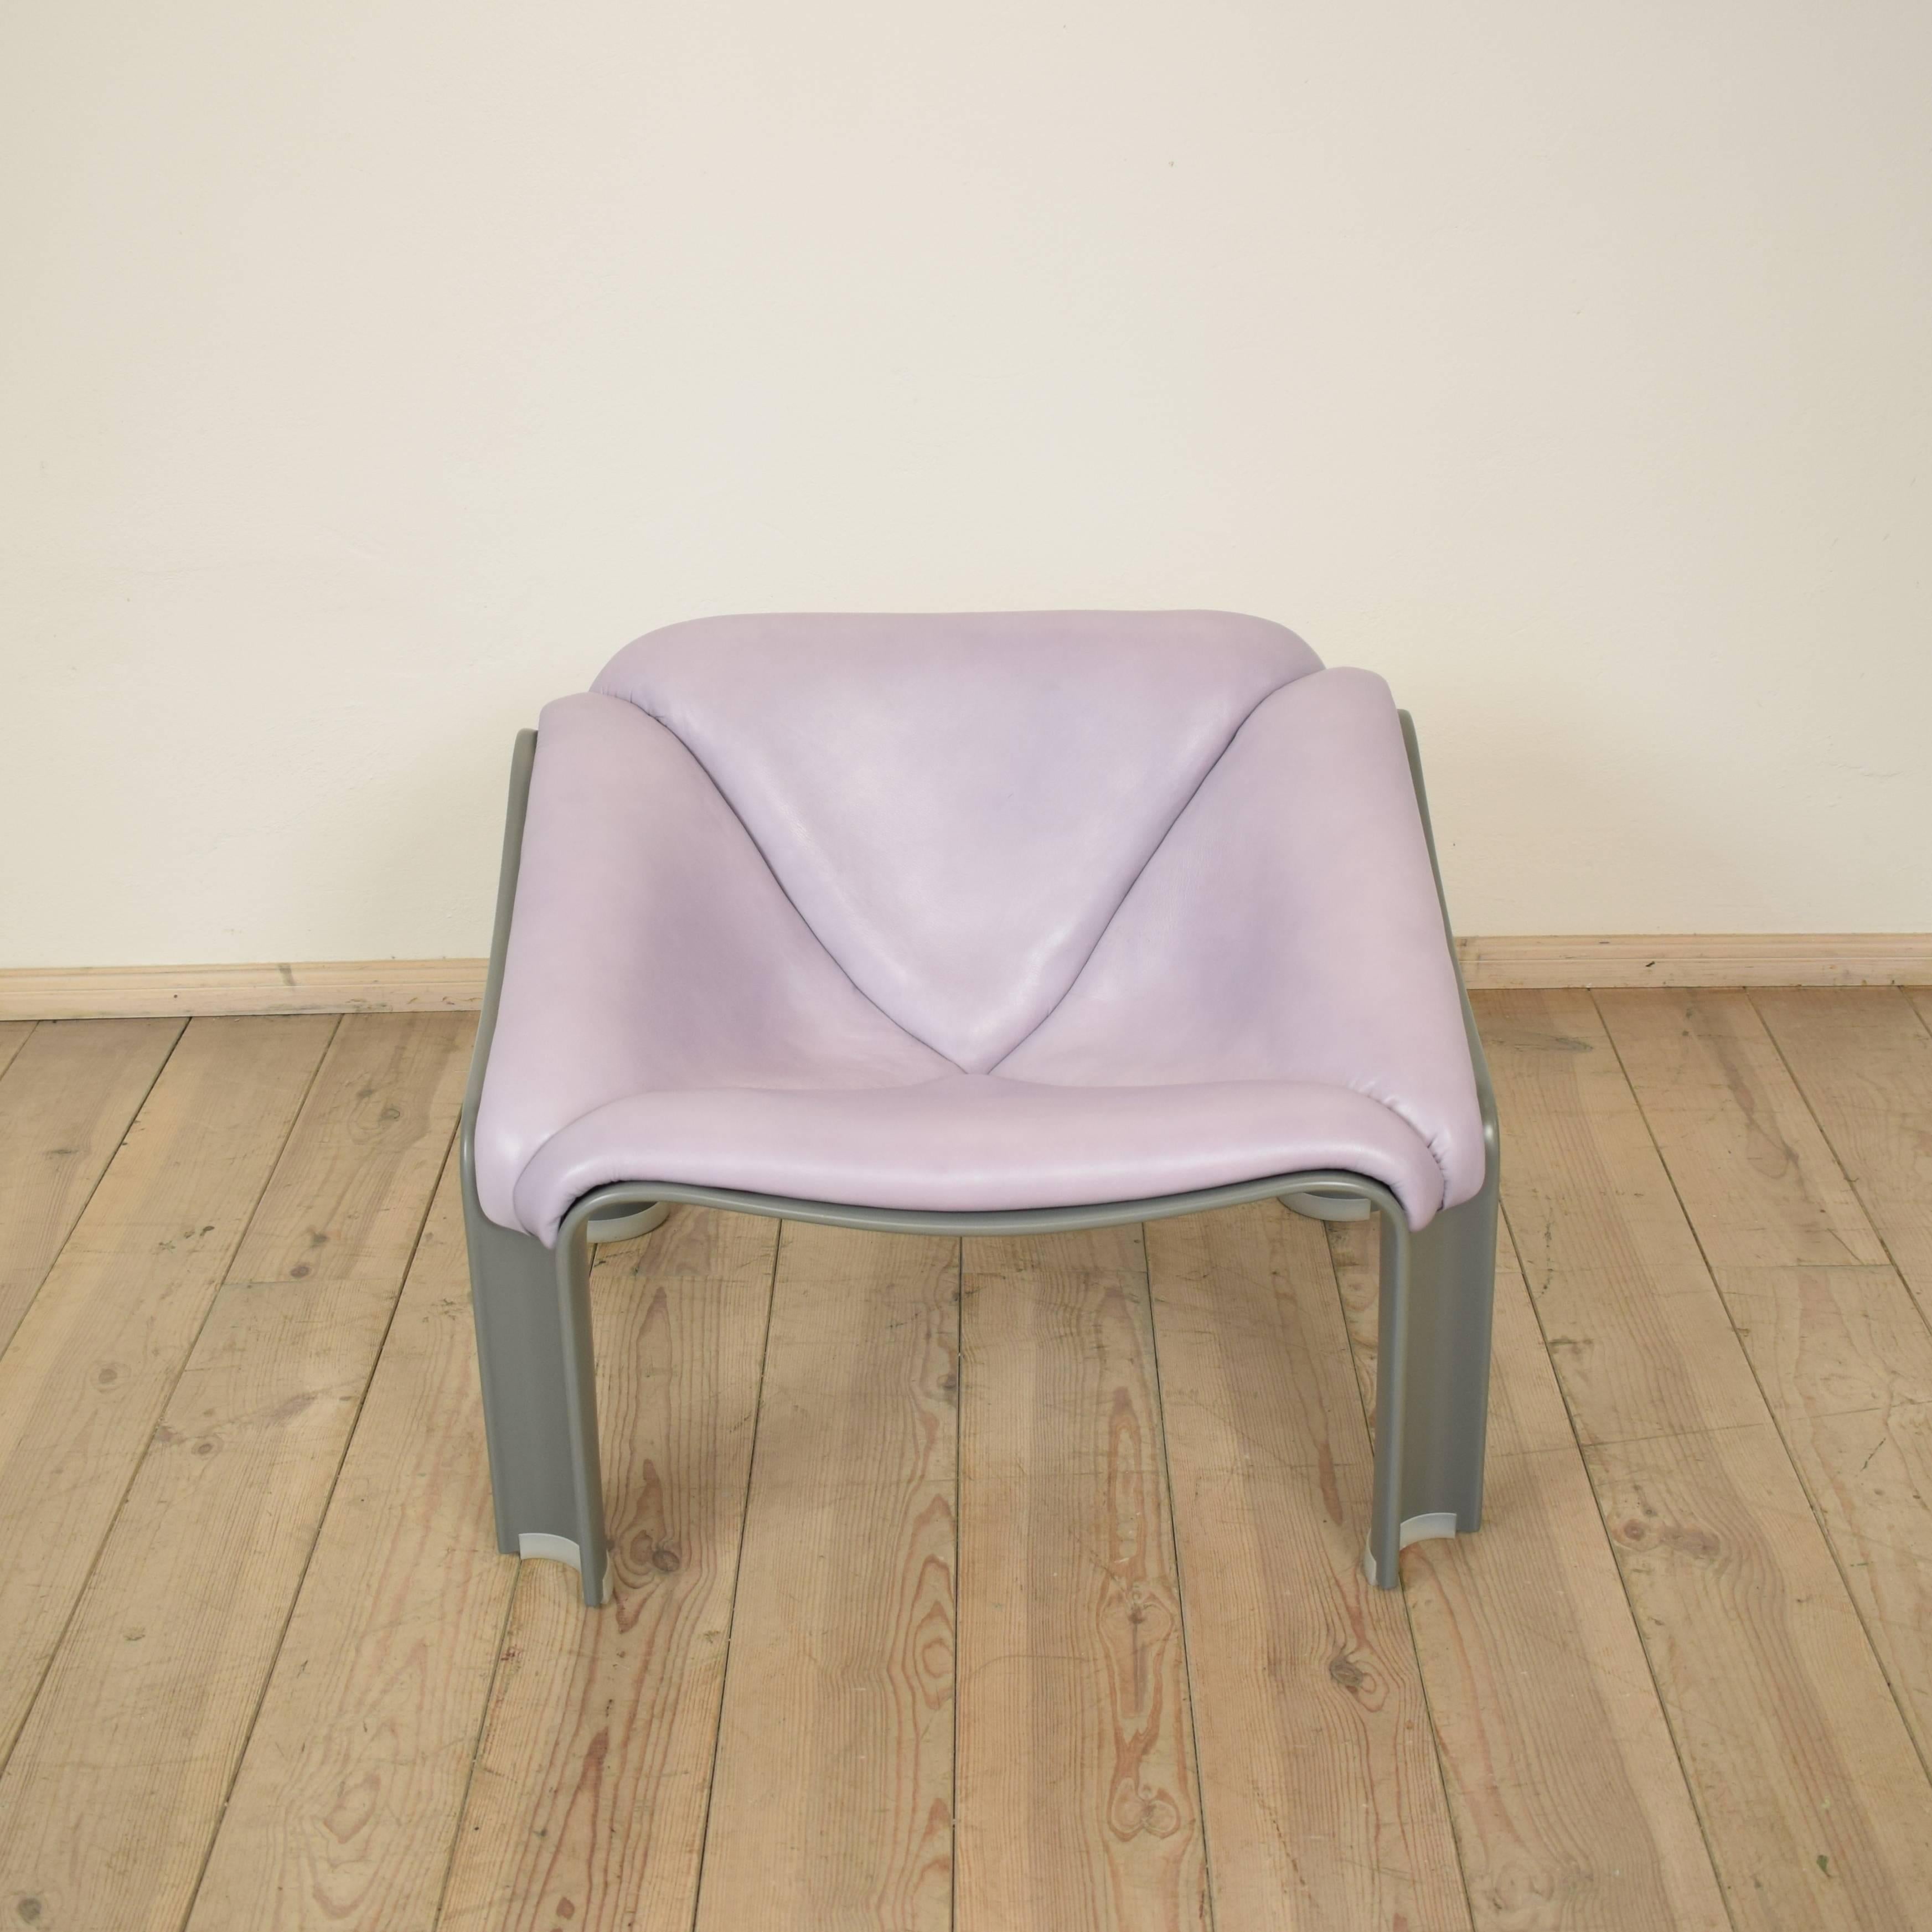 This chair was designed by Pierre Paulin for Artifort, circa 1960. The chair is made from plastic which was re-lacquered in light grey. The upholstered was re-done in a light purple/grey fine leather. The chair is in a very good condition.